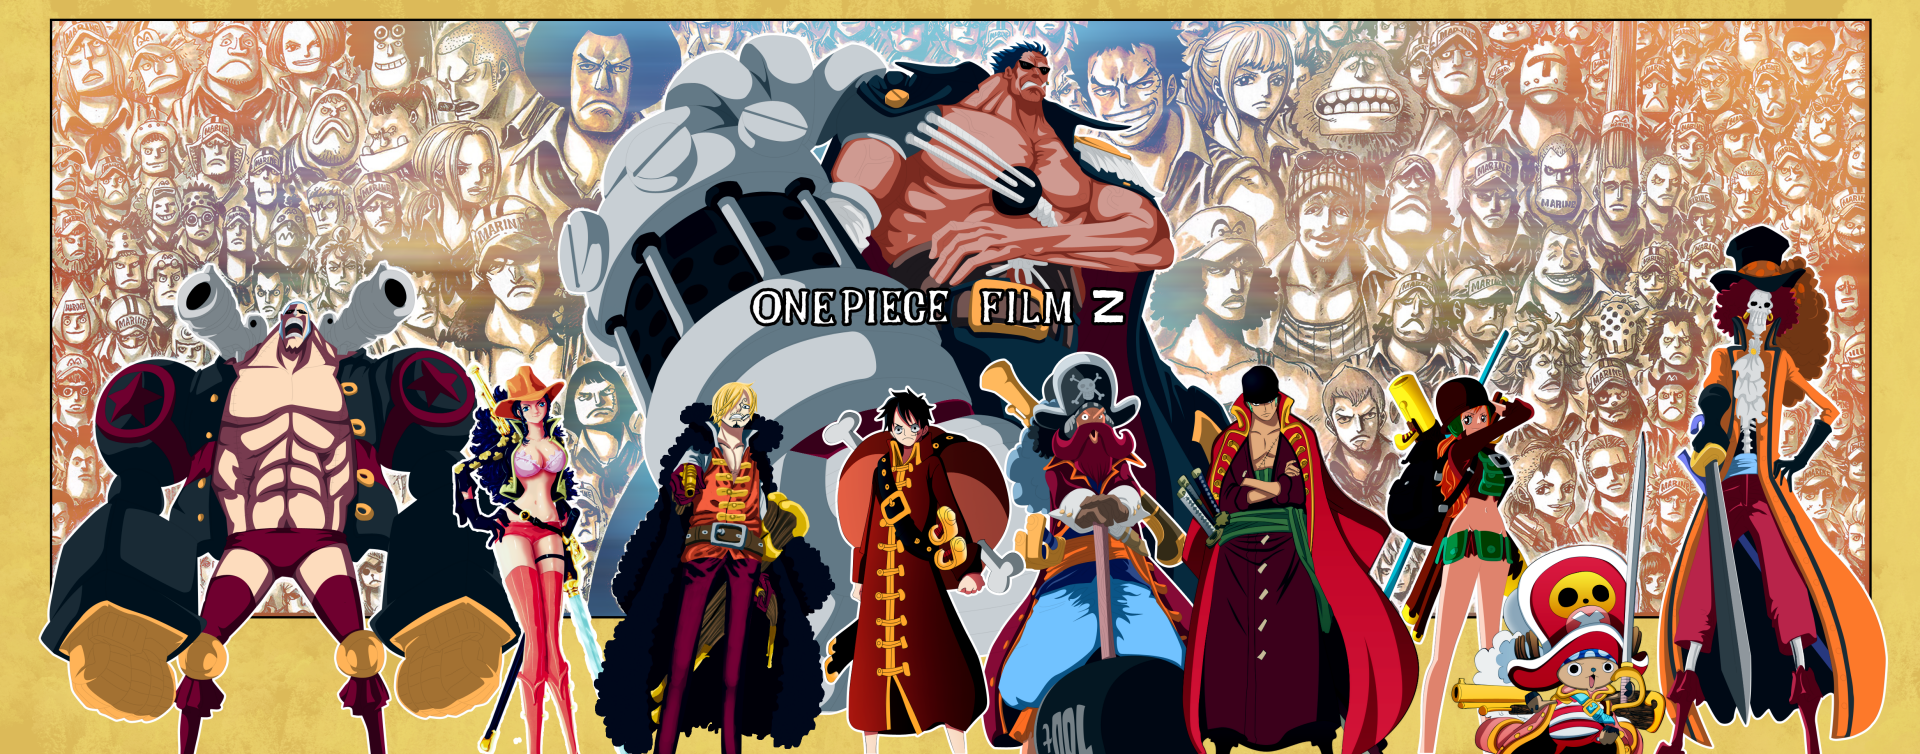 1 One Piece Film Z Hd Wallpapers Background Images Wallpaper Abyss